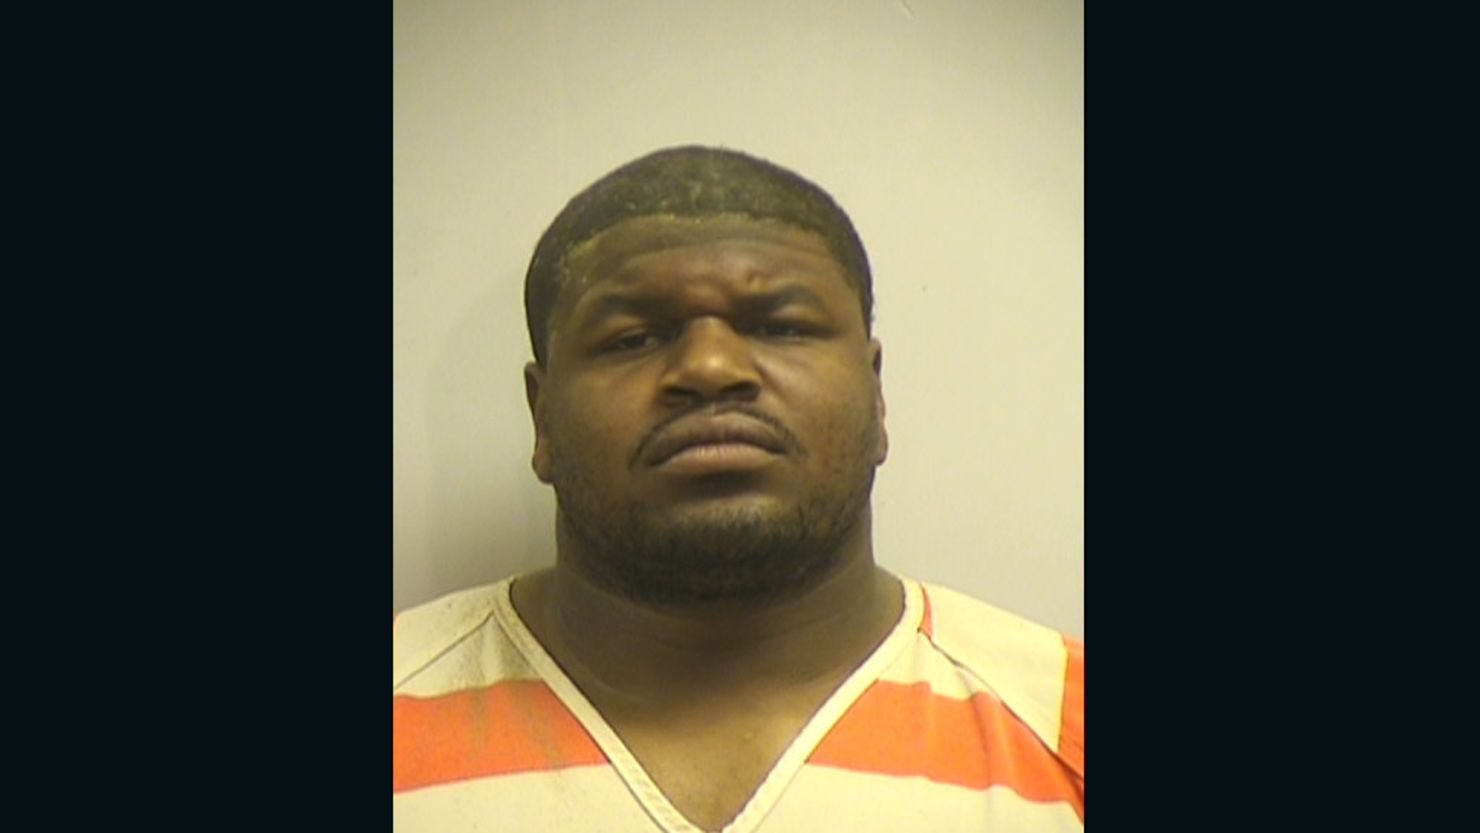 Josh Brent, 24, was arrested on suspicion of intoxication manslaughter in the death of teammate Jerry Brown.